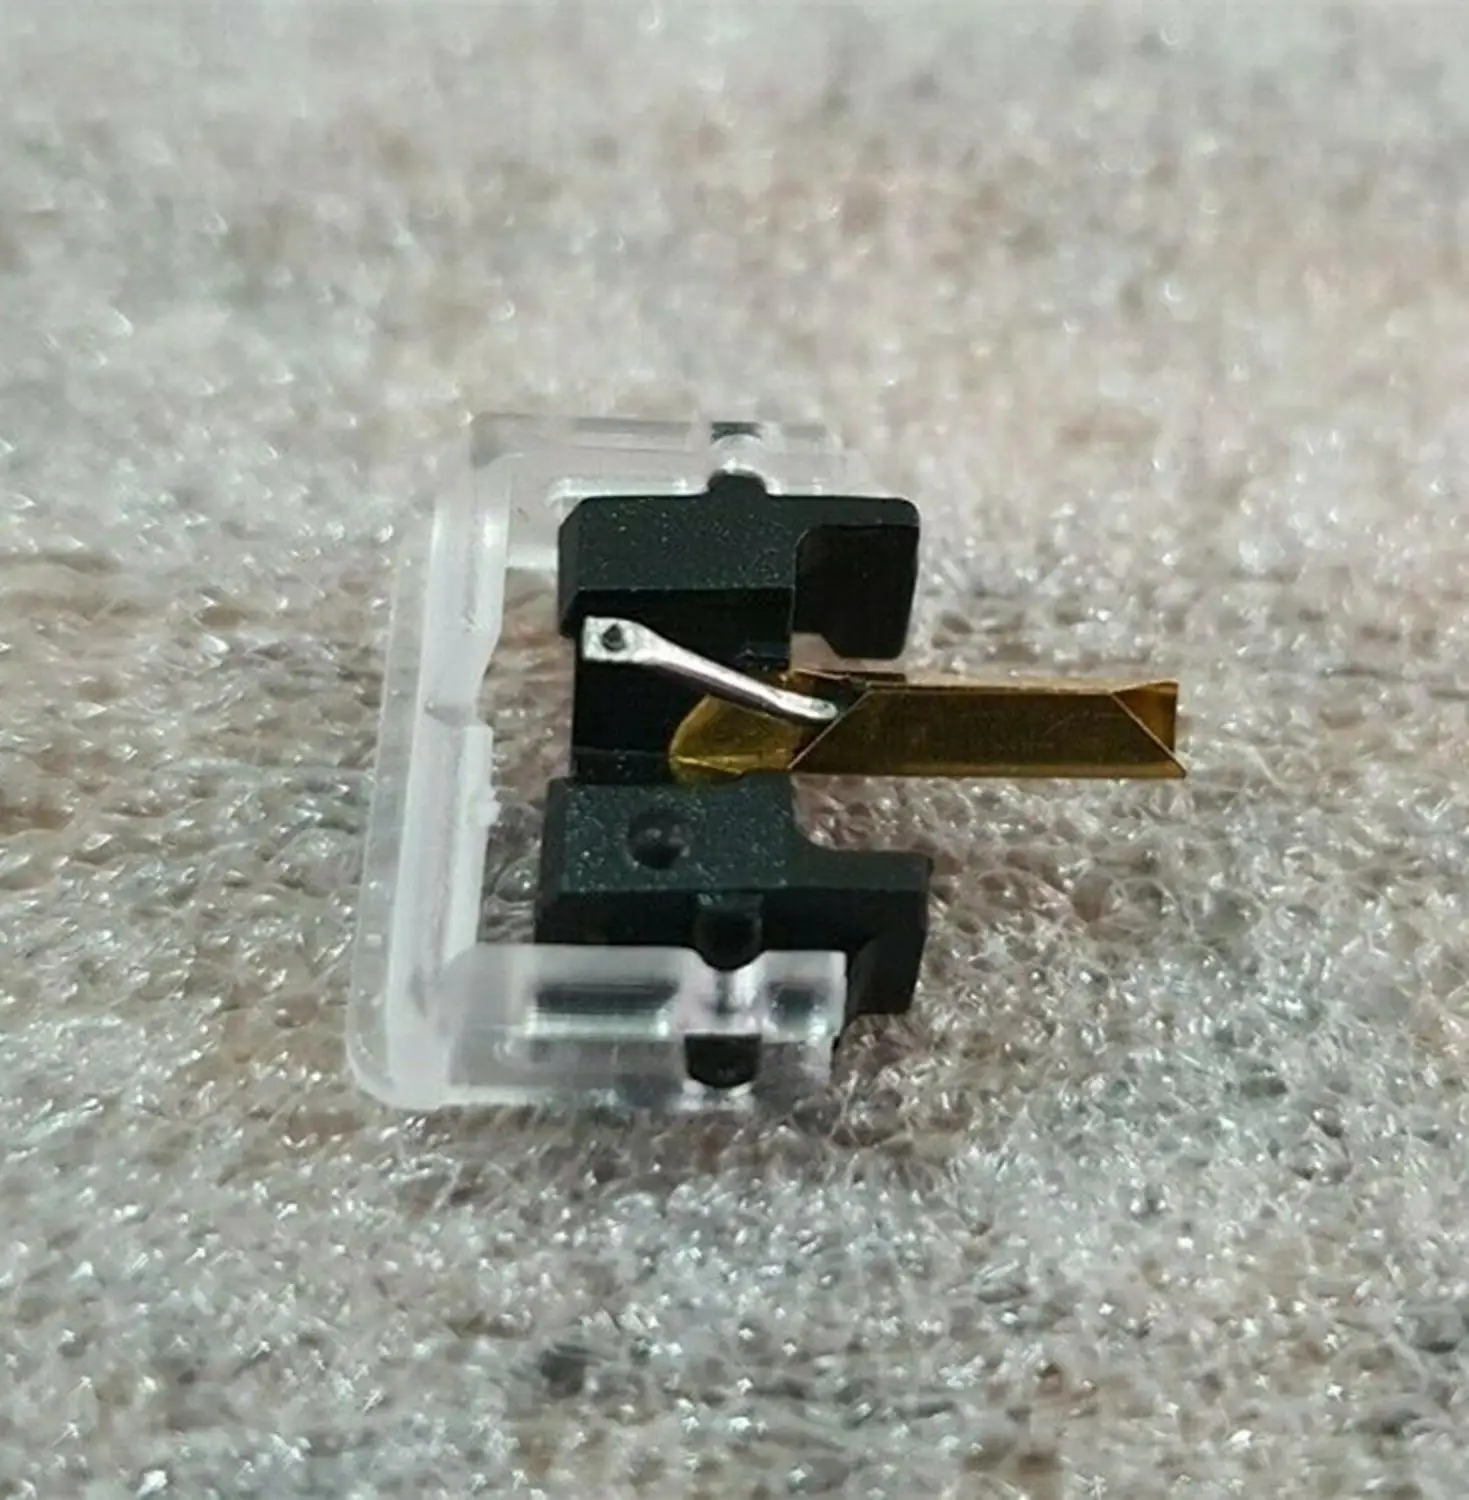 Balck Or White Replacement Stylus For Shure N44 7 M44g M44 7 Cartridges Turntables Aliexpress